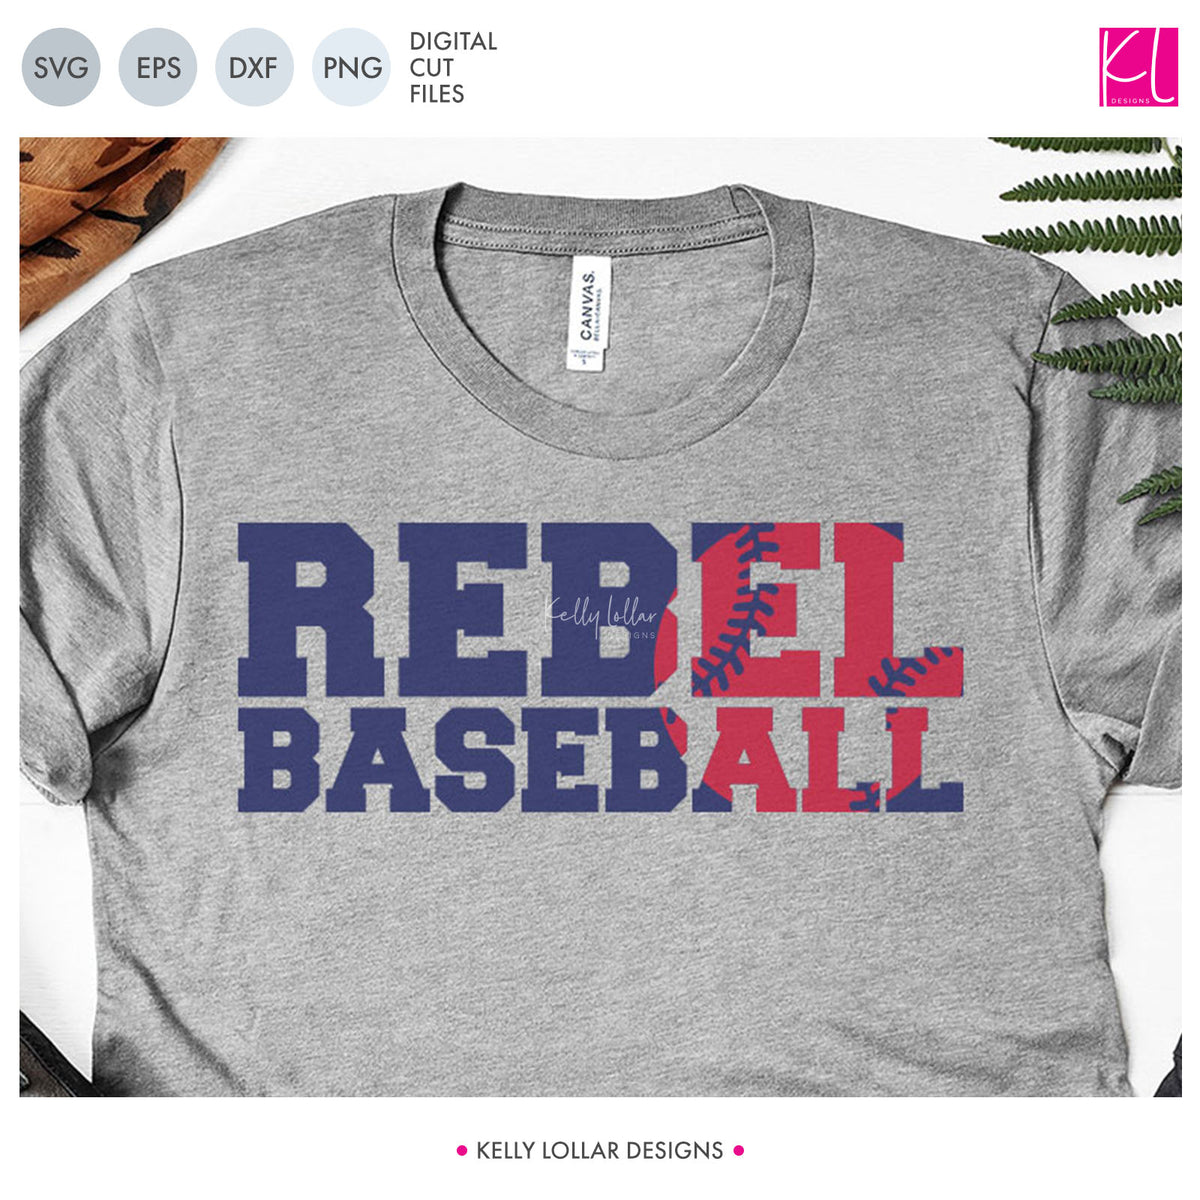 Rebels Sports Pack | SVG DXF EPS PNG Cut Files